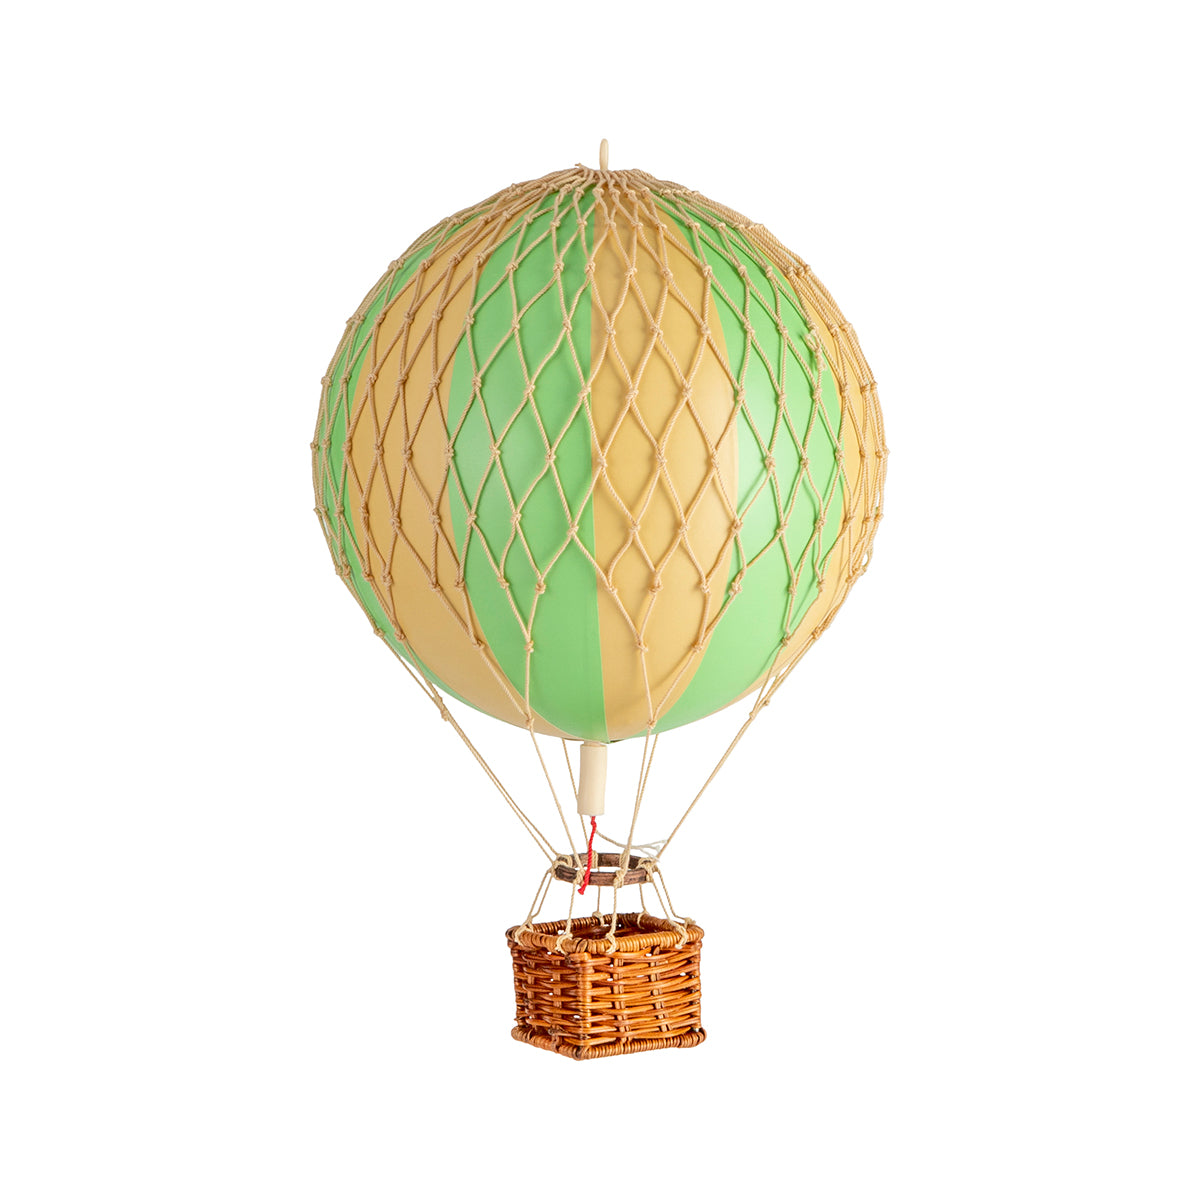 A Wonderen Small Hot Air Balloon - Travels Light with a basket, showcasing the intersection of science and nature through its green and brown design.